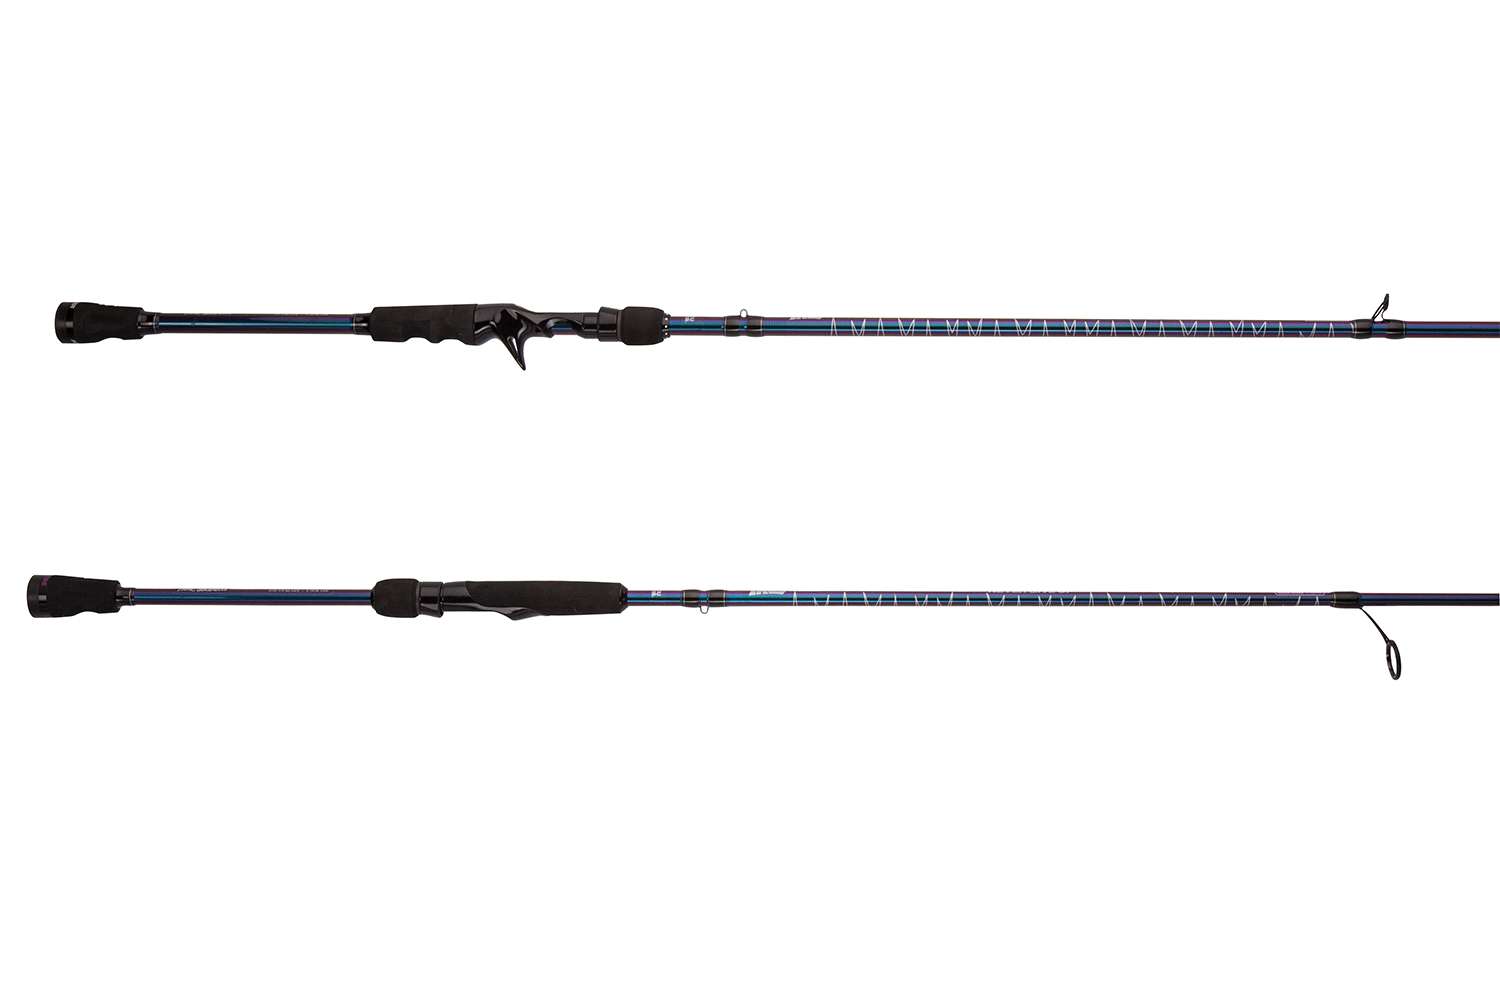 <p><b>Abu Garcia Ike Signature Series rods, $149.95</b></p> Fuji reels seats, stainless steel guides and Mike Iaconelliâs unmistakable cosmetics set these rods apart from the competition. With a full assortment of 21 different models, Ikeâs Signature Series offers the right rod for every fishing situation.<br> <a href=